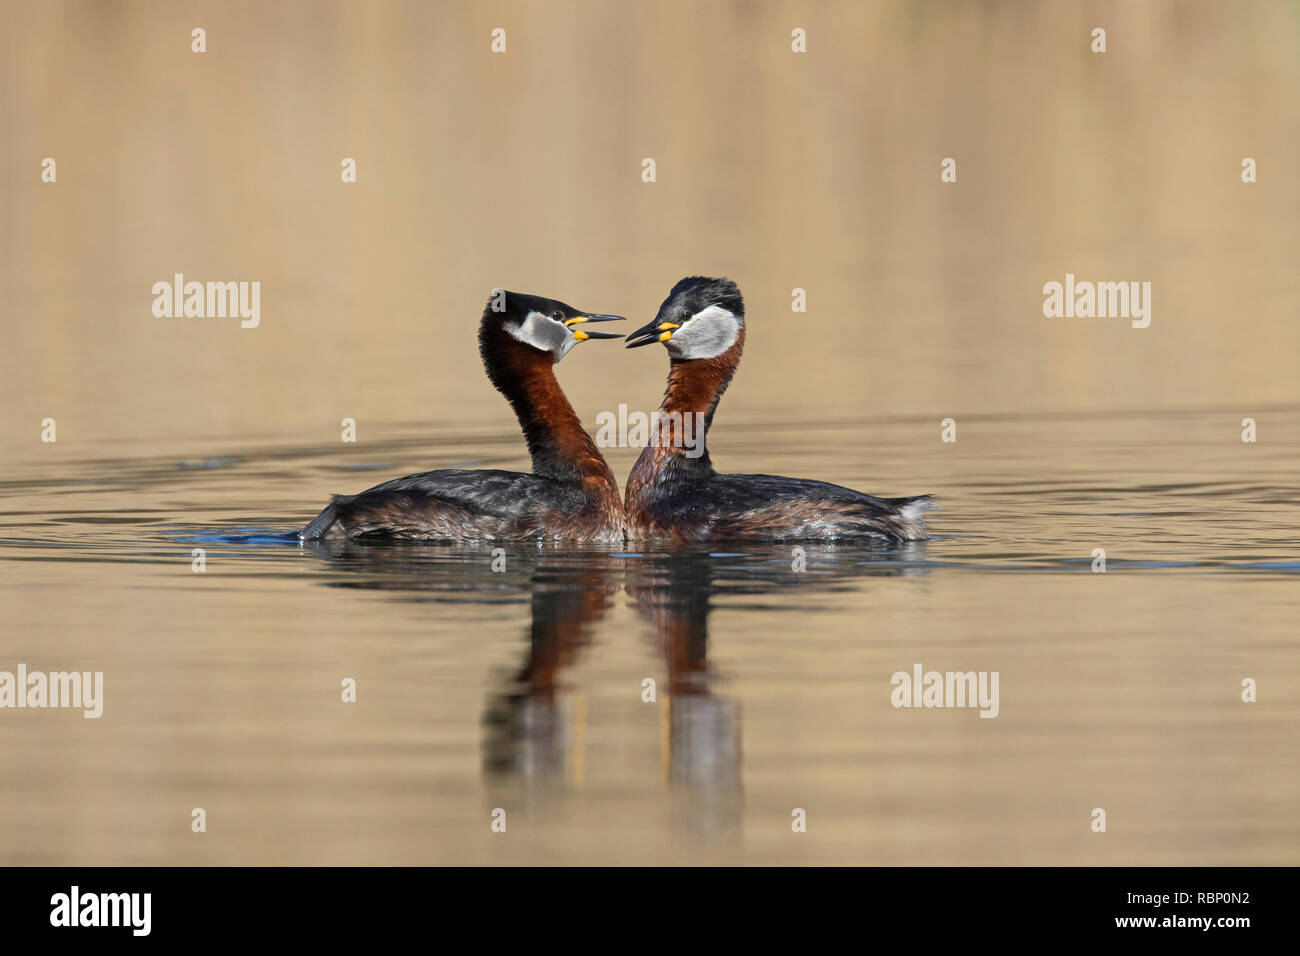 Red-necked grebe (Podiceps grisegena / Podiceps griseigena) couple displaying during mating ritual in lake during the breeding season in spring Stock Photo